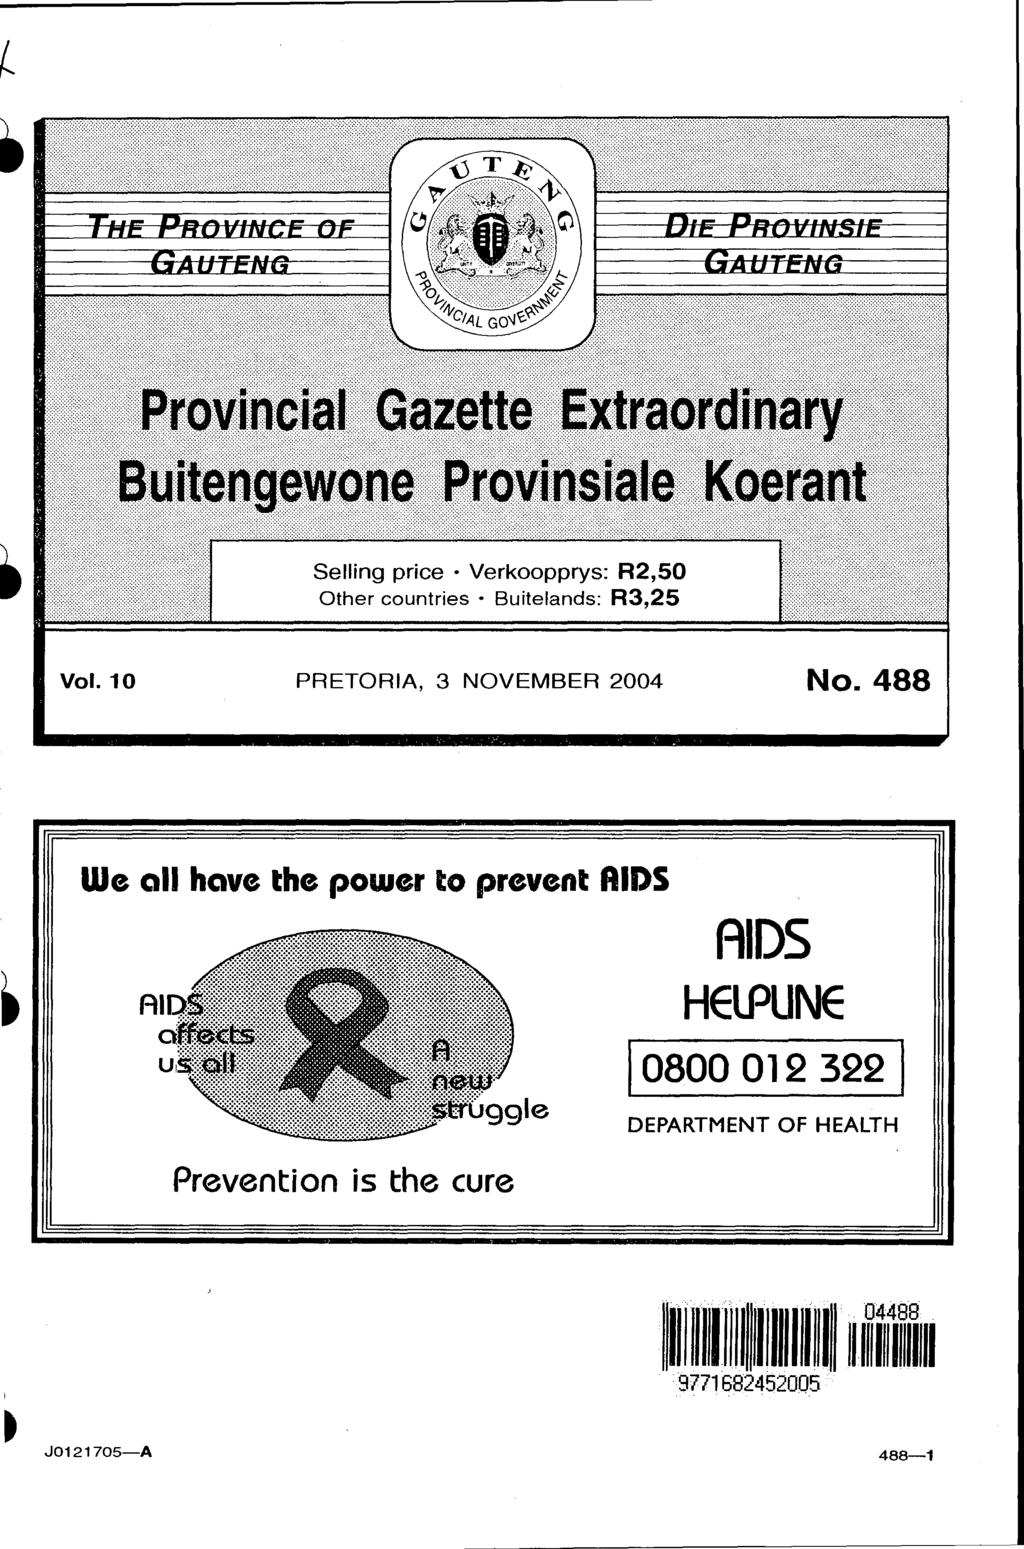 Selling price Verkoopprys: R2,50 Other countries Buitelands: R3,25 Vol. 10 PRETORIA, 3 NOVEMBER 2004 No.